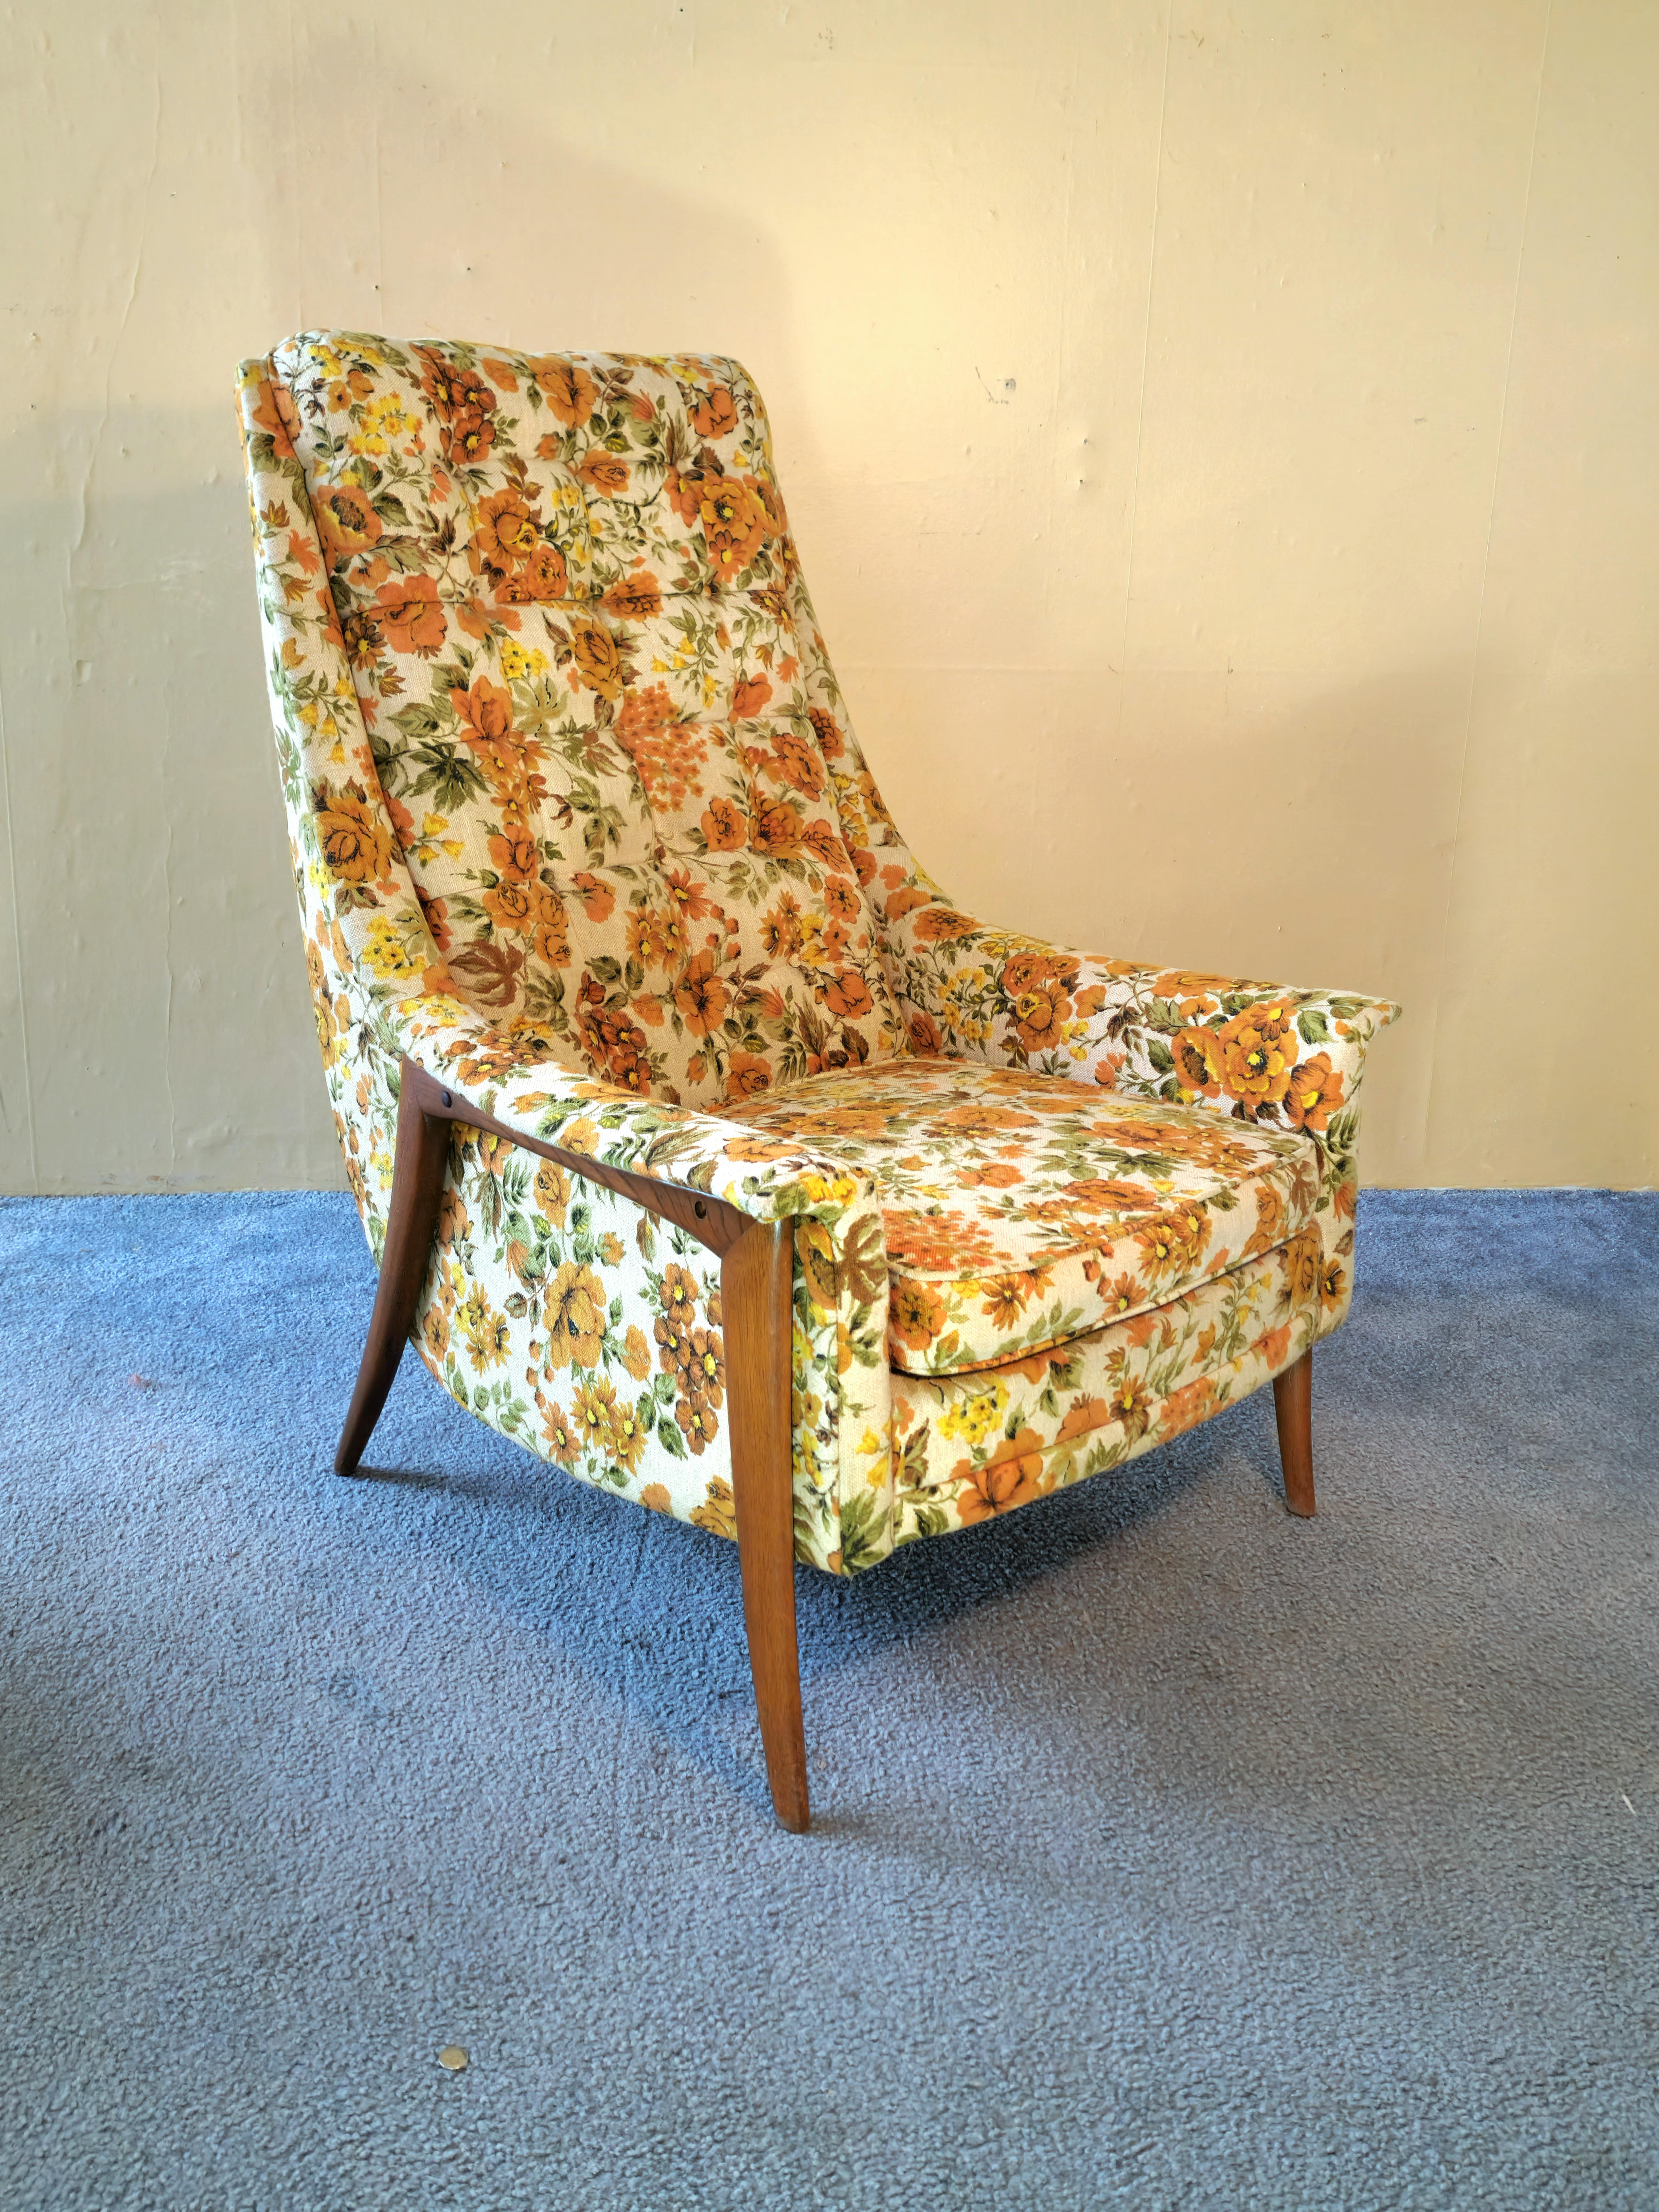 This is a fantastic example of a Mid-Century Modern chair from Kroehler Furniture Company. Made with a sculptural structure with the base and seating area wider then tapers in sleaker to the back rest. It has tufted orginal upholstery with a fun and